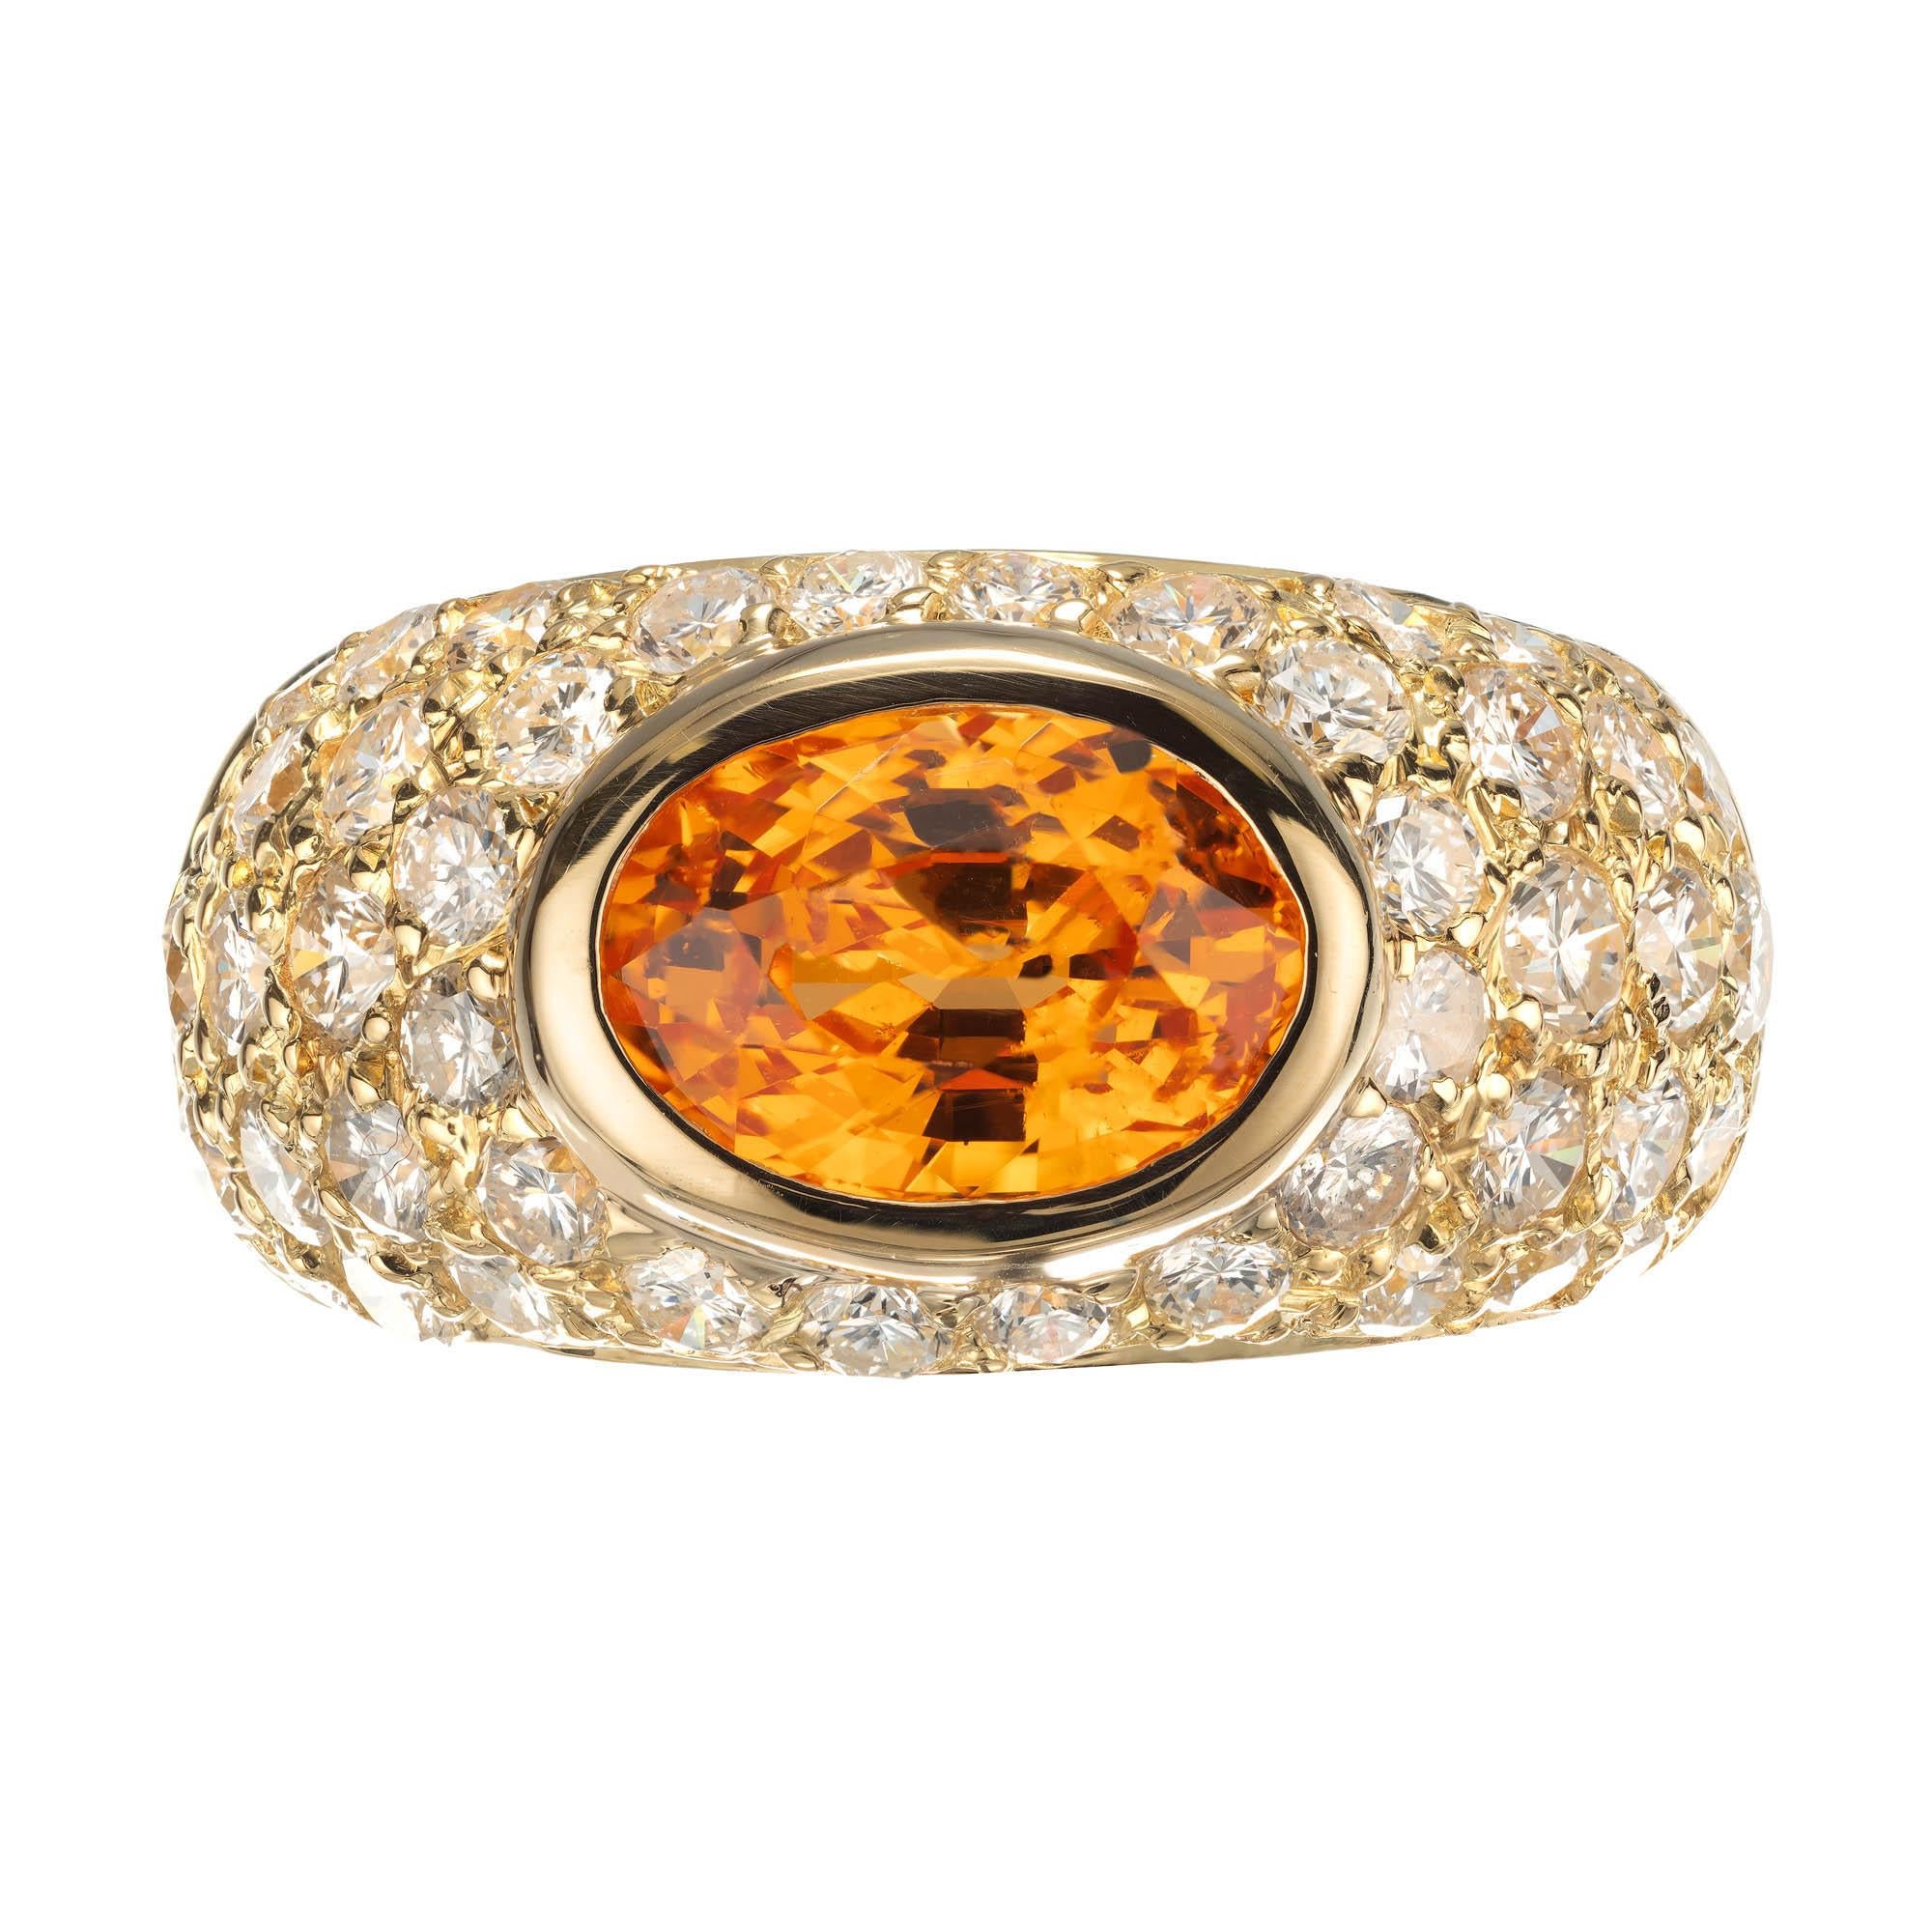 1960's Mid-Century vibrant Spessartite Garnet and diamond dome cocktail ring. 2.43ct Oval orange bezel set sideways Spessartine in a beautiful handmade dome 18k yellow gold setting with a cluster of 45 round pave set diamonds.  

1 oval bright